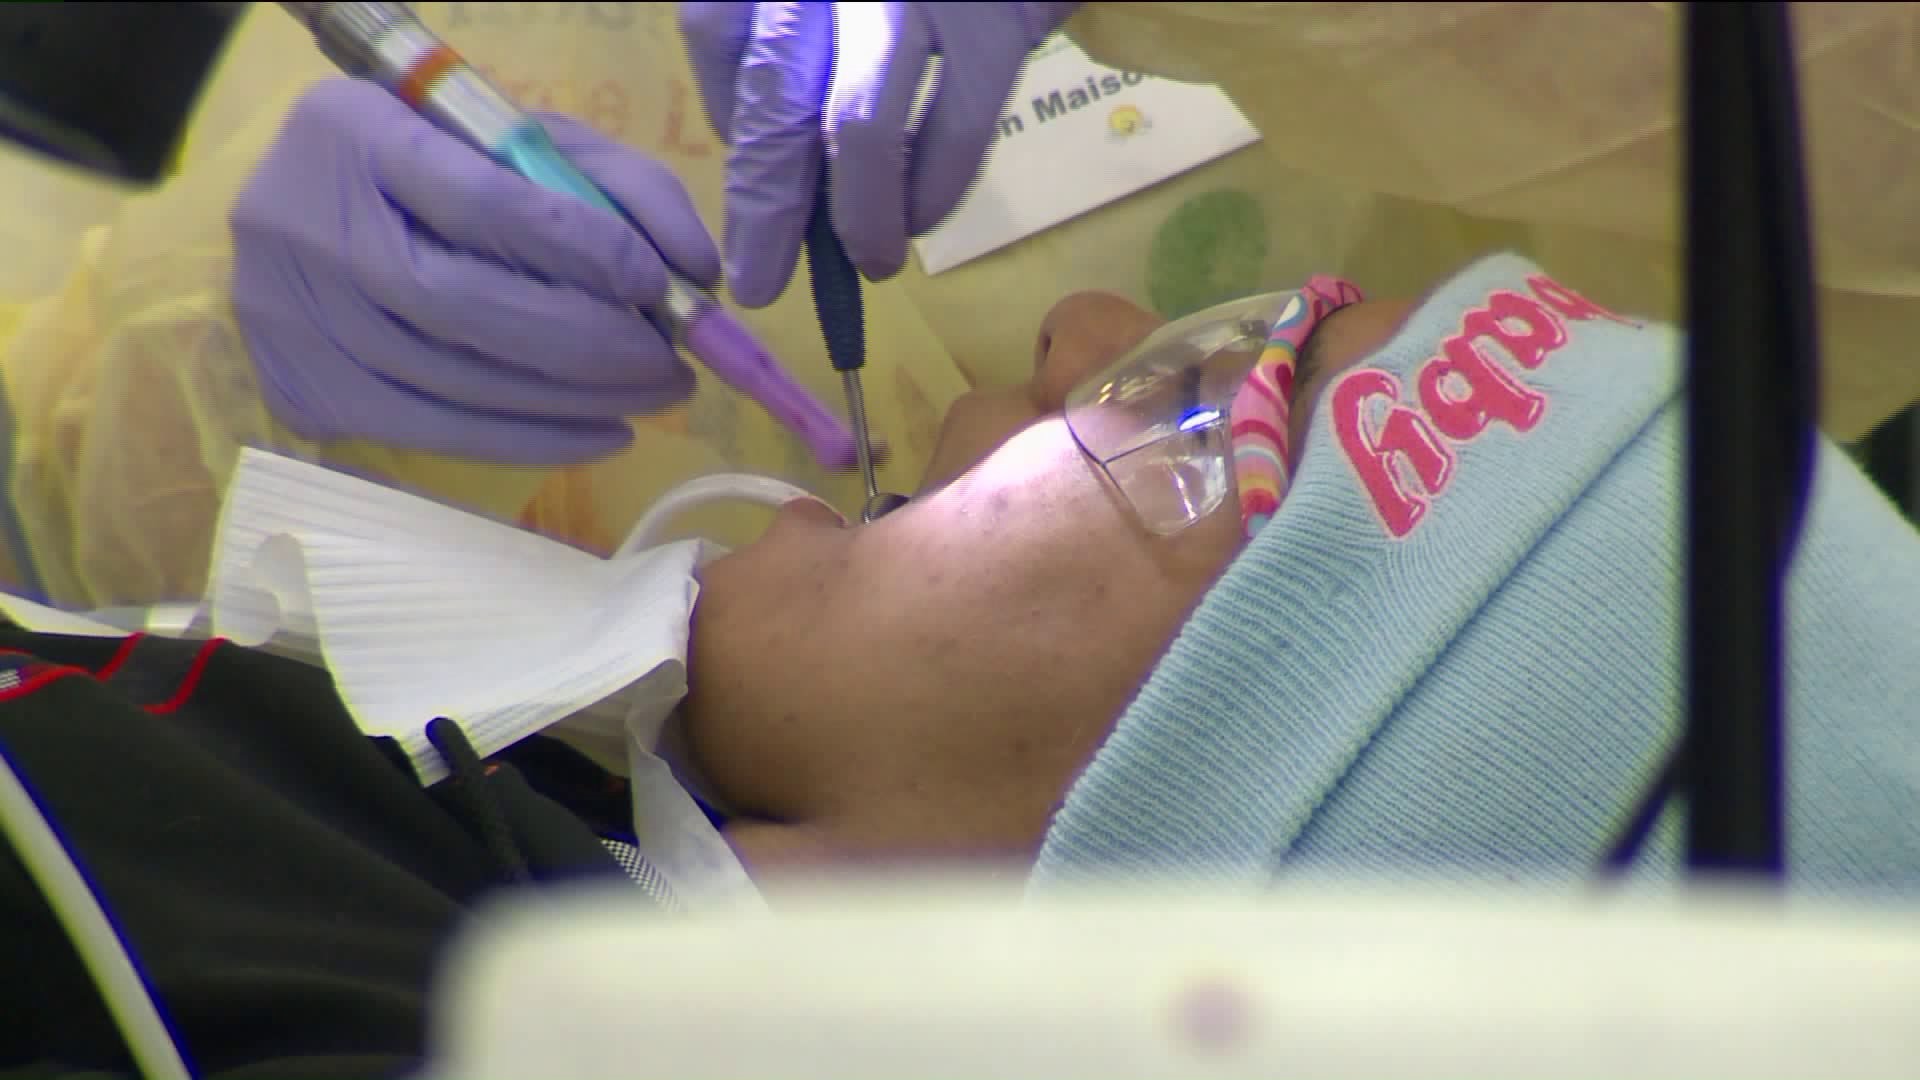 Mission of Mercy free dental clinic reaches capacity